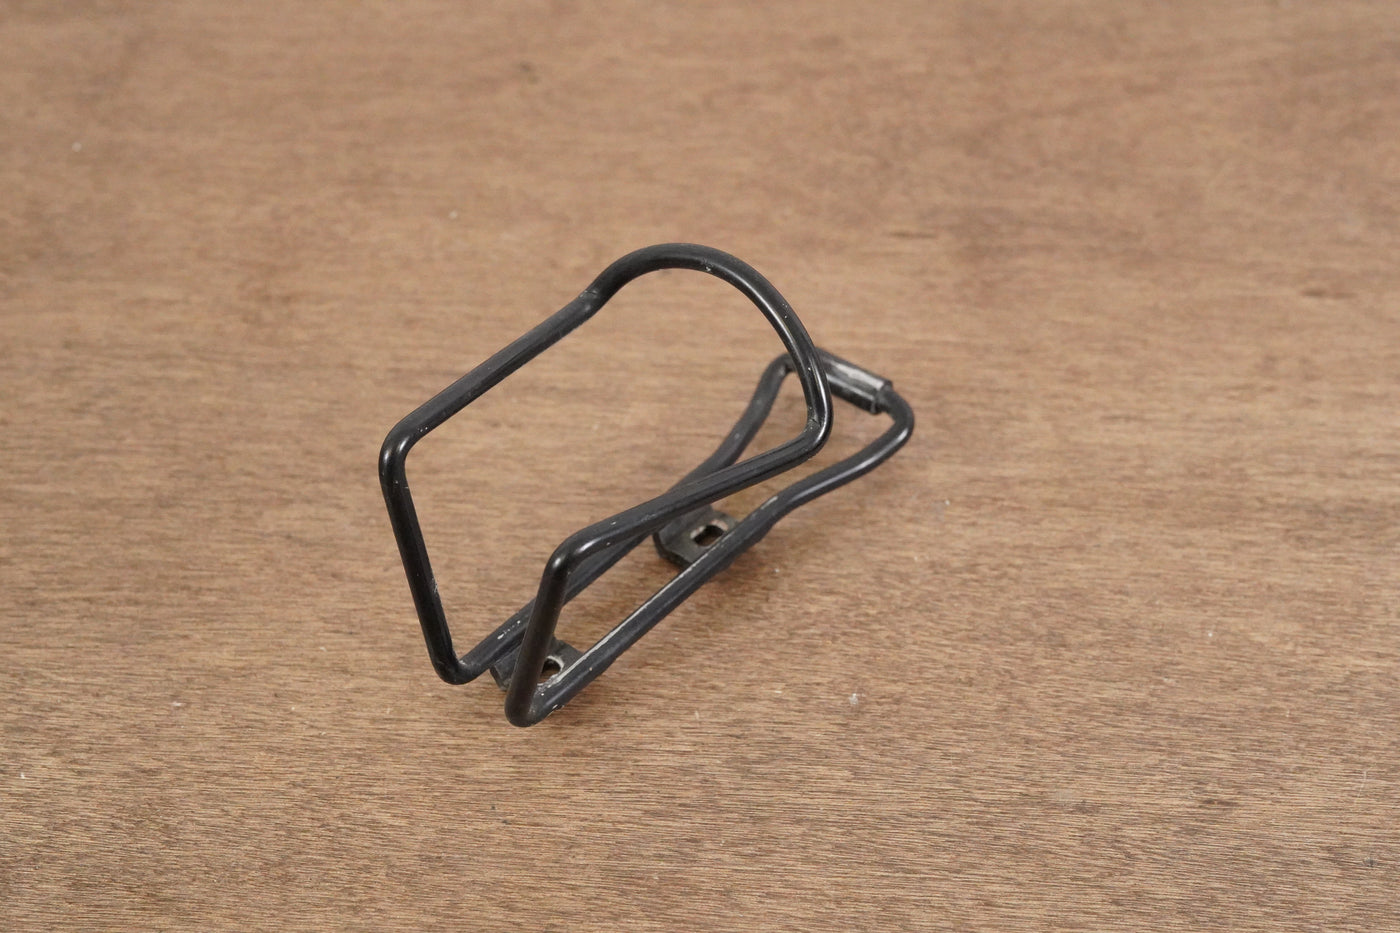 (1) Alloy Water Bottle Cage 70g